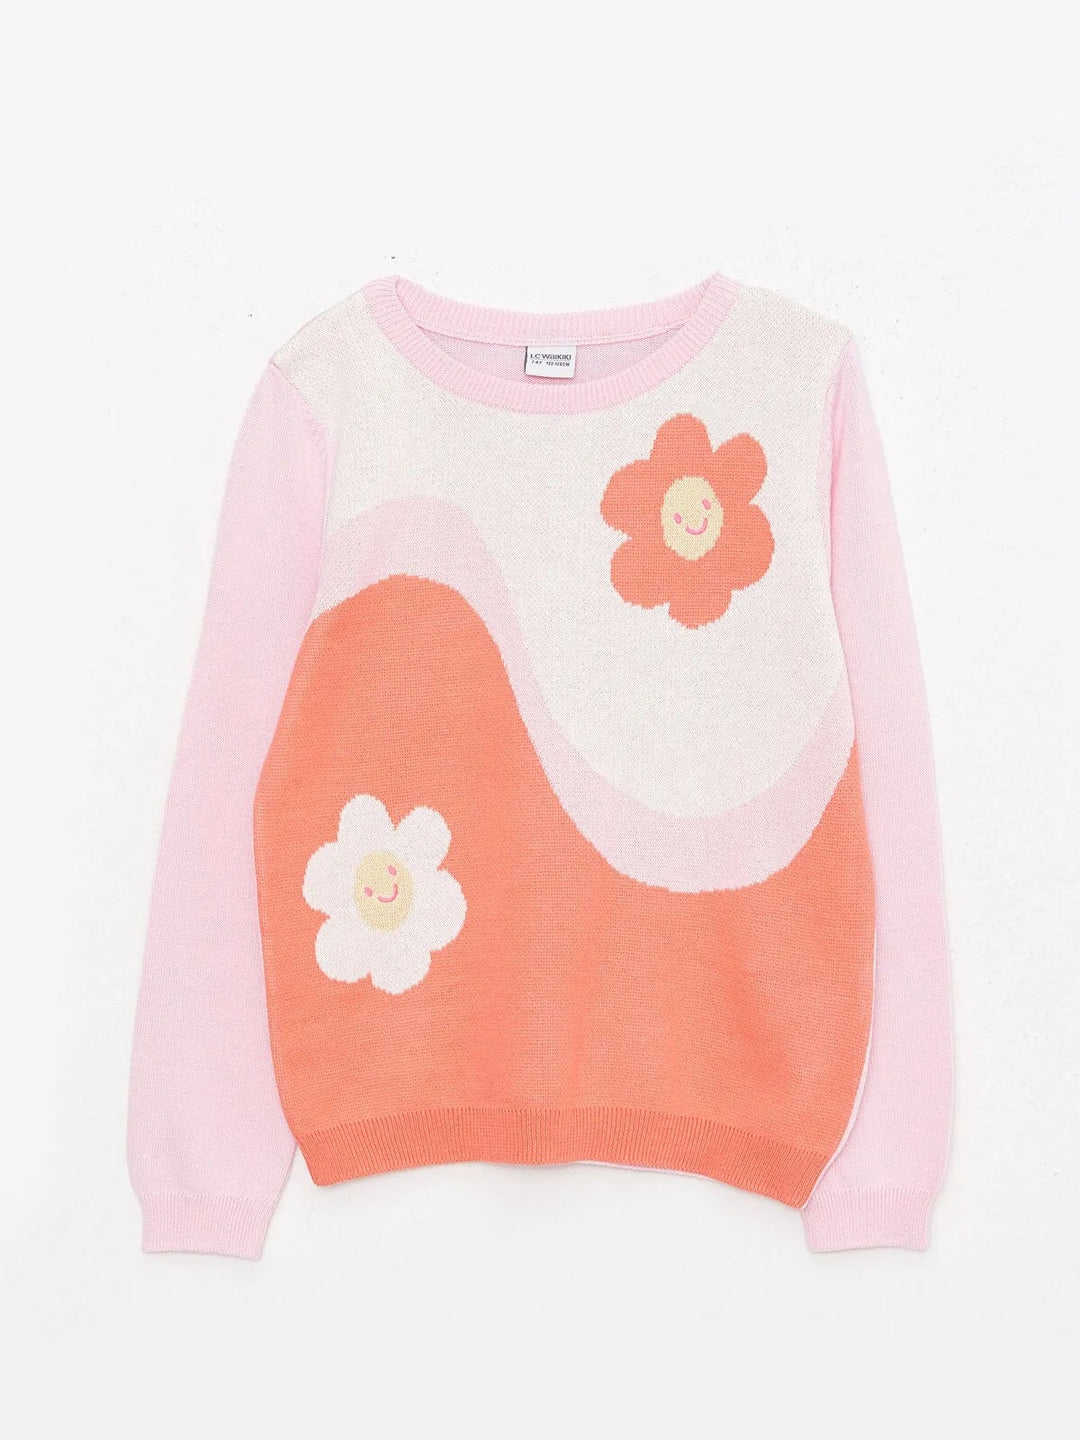 Crew Neck Patterned Long Sleeve Girl Knit Sweater